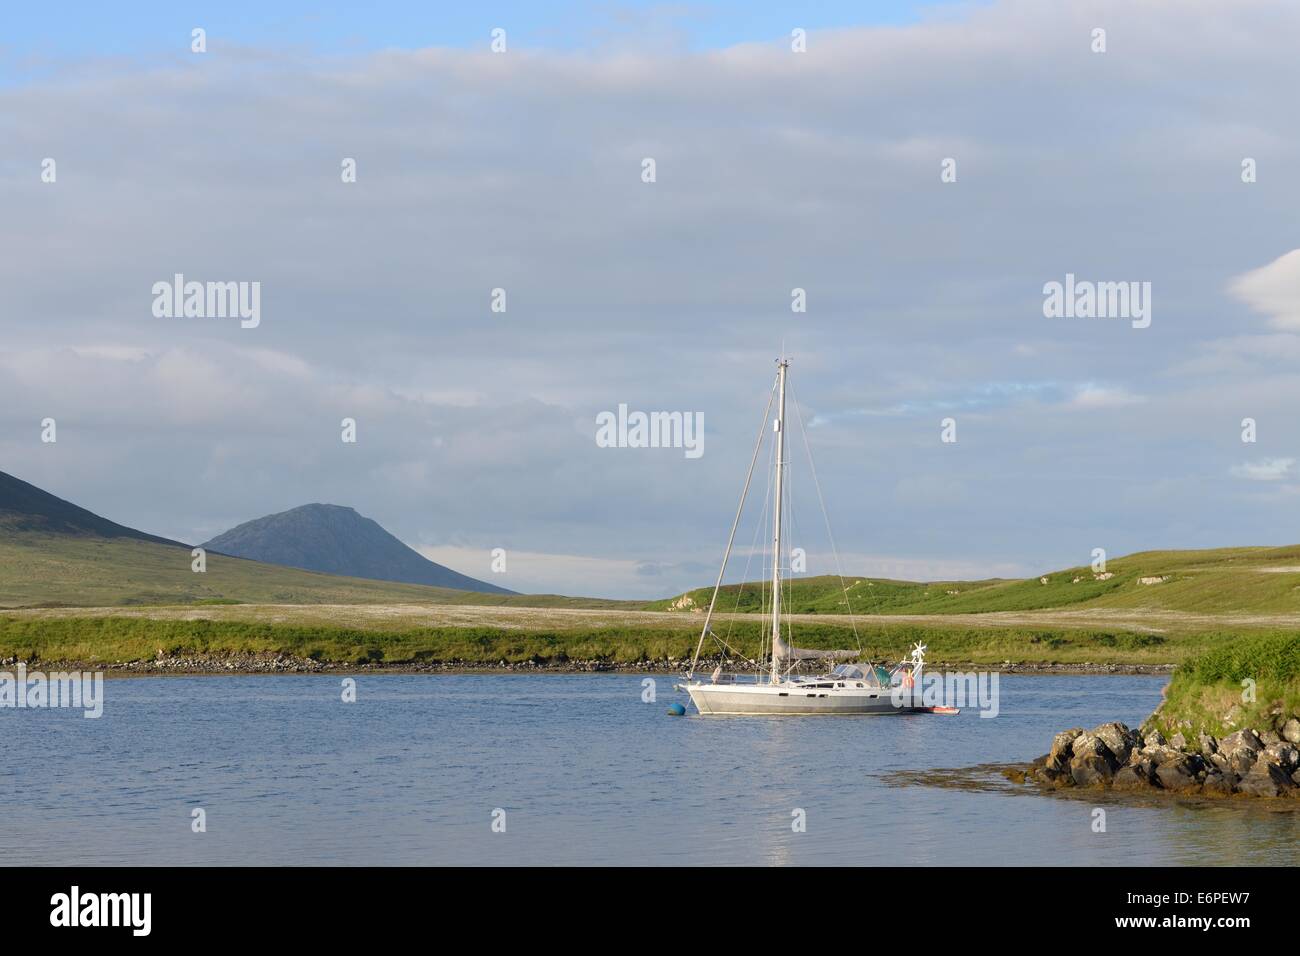 Yacht moored in the bay off Lochmaddy, North Uist, Outer Hebrides, Scotland Stock Photo